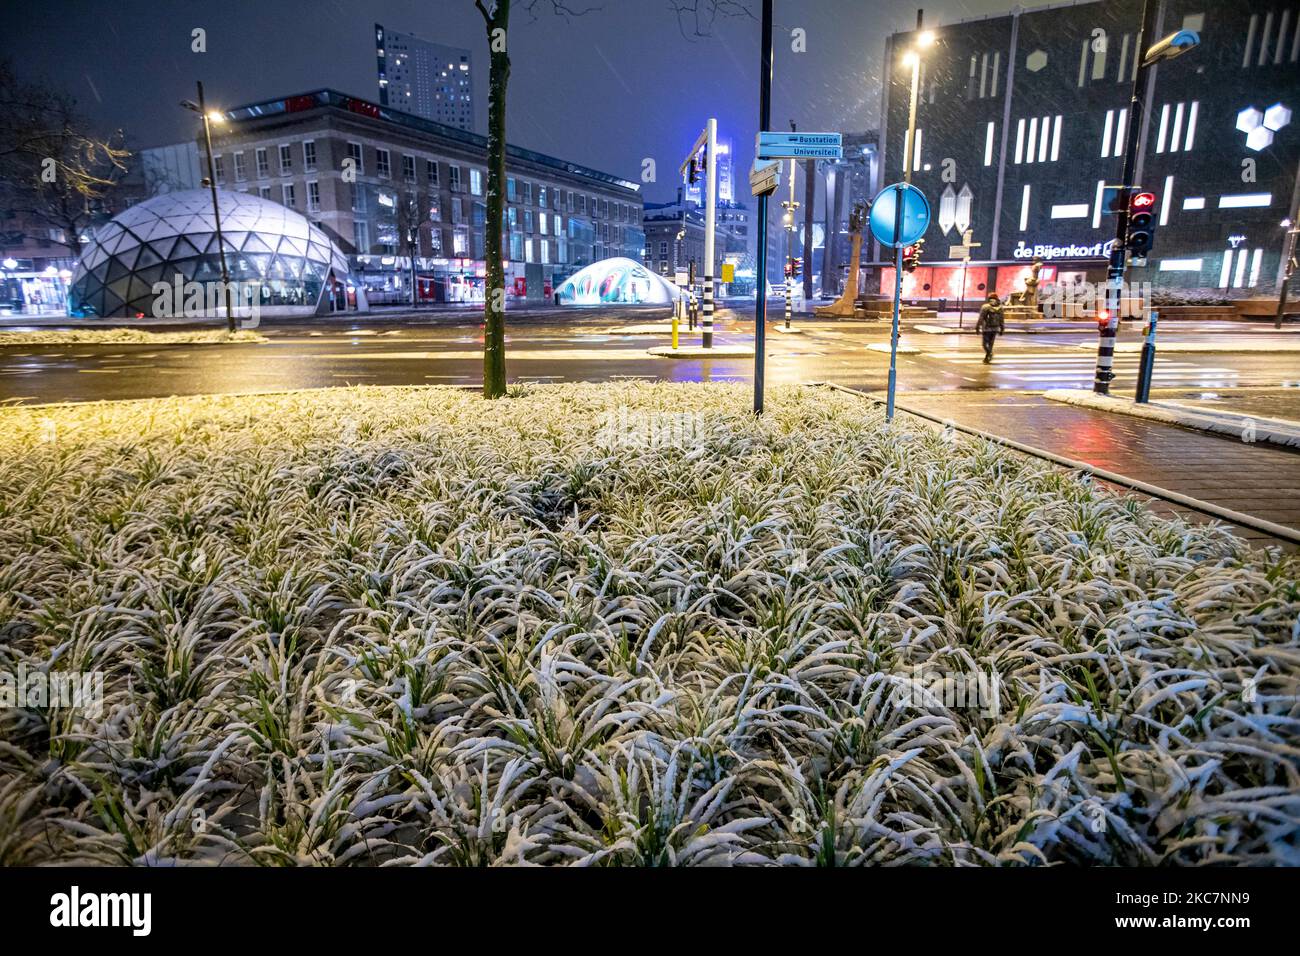 Night long exposure photography images of snow-covered and illuminated with city lights Eindhoven city center after the snowfall. Daily life in the Netherlands with the first snowfall of the year covering almost everything the cold weather shows subzero temperature. The chilly condition with snow and ice changed soon according to the forecast, the freezing condition will not last more than a day. Eindhoven, the Netherlands on January 16, 2020 (Photo by Nicolas Economou/NurPhoto) Stock Photo